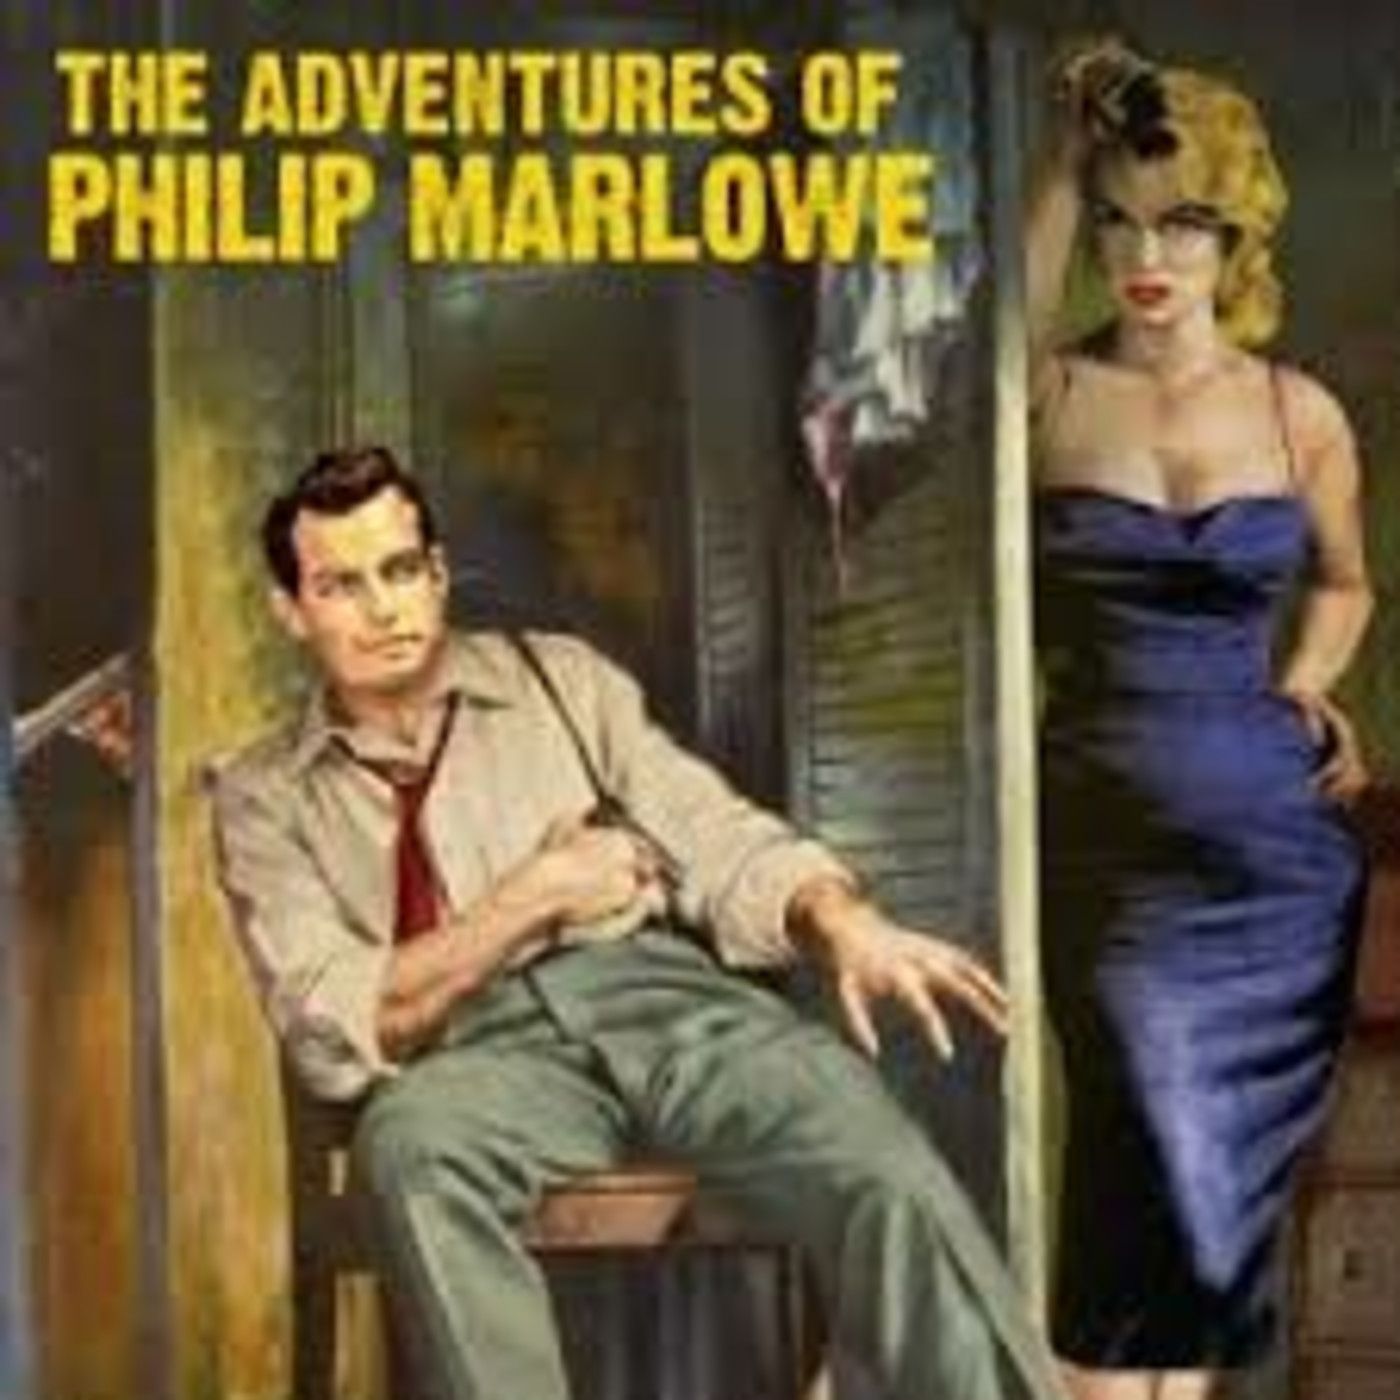 The Adventures of Philip Marlowe - Friend from Detroit